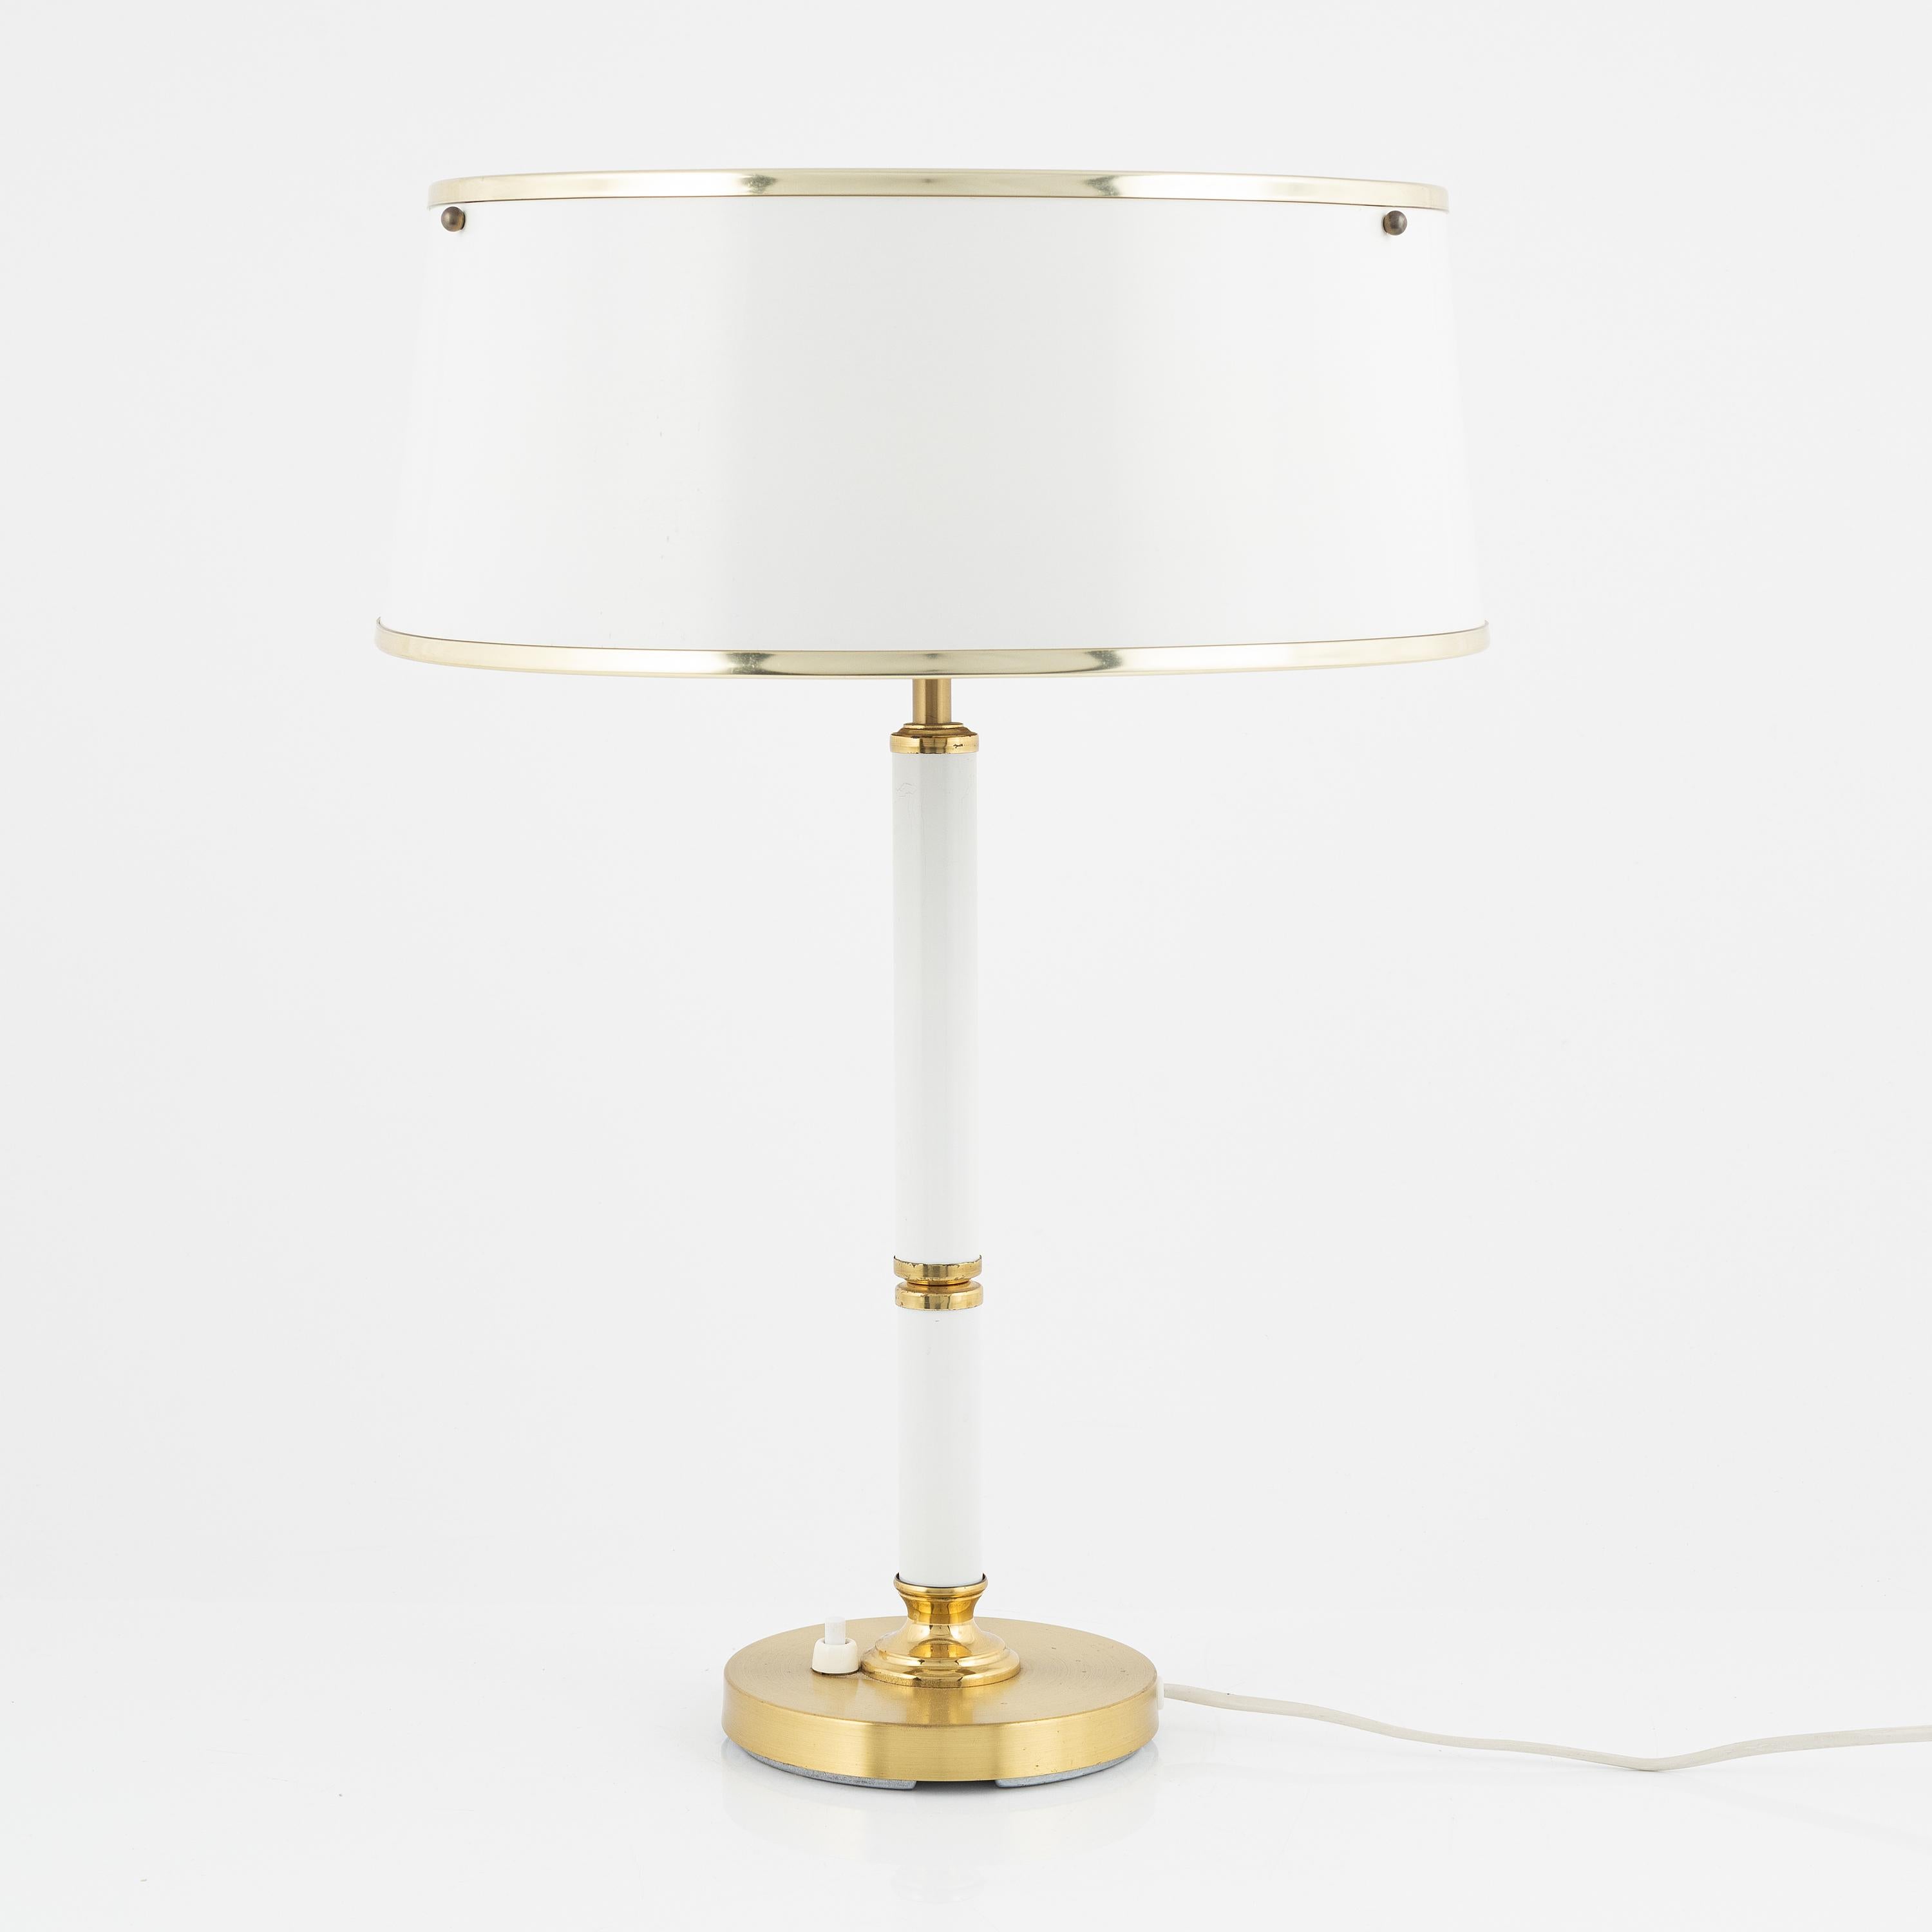 Table lamp by Borens rare model 8423 made in Sweden 1970 signed on label
White and brass color, good vintage condition.